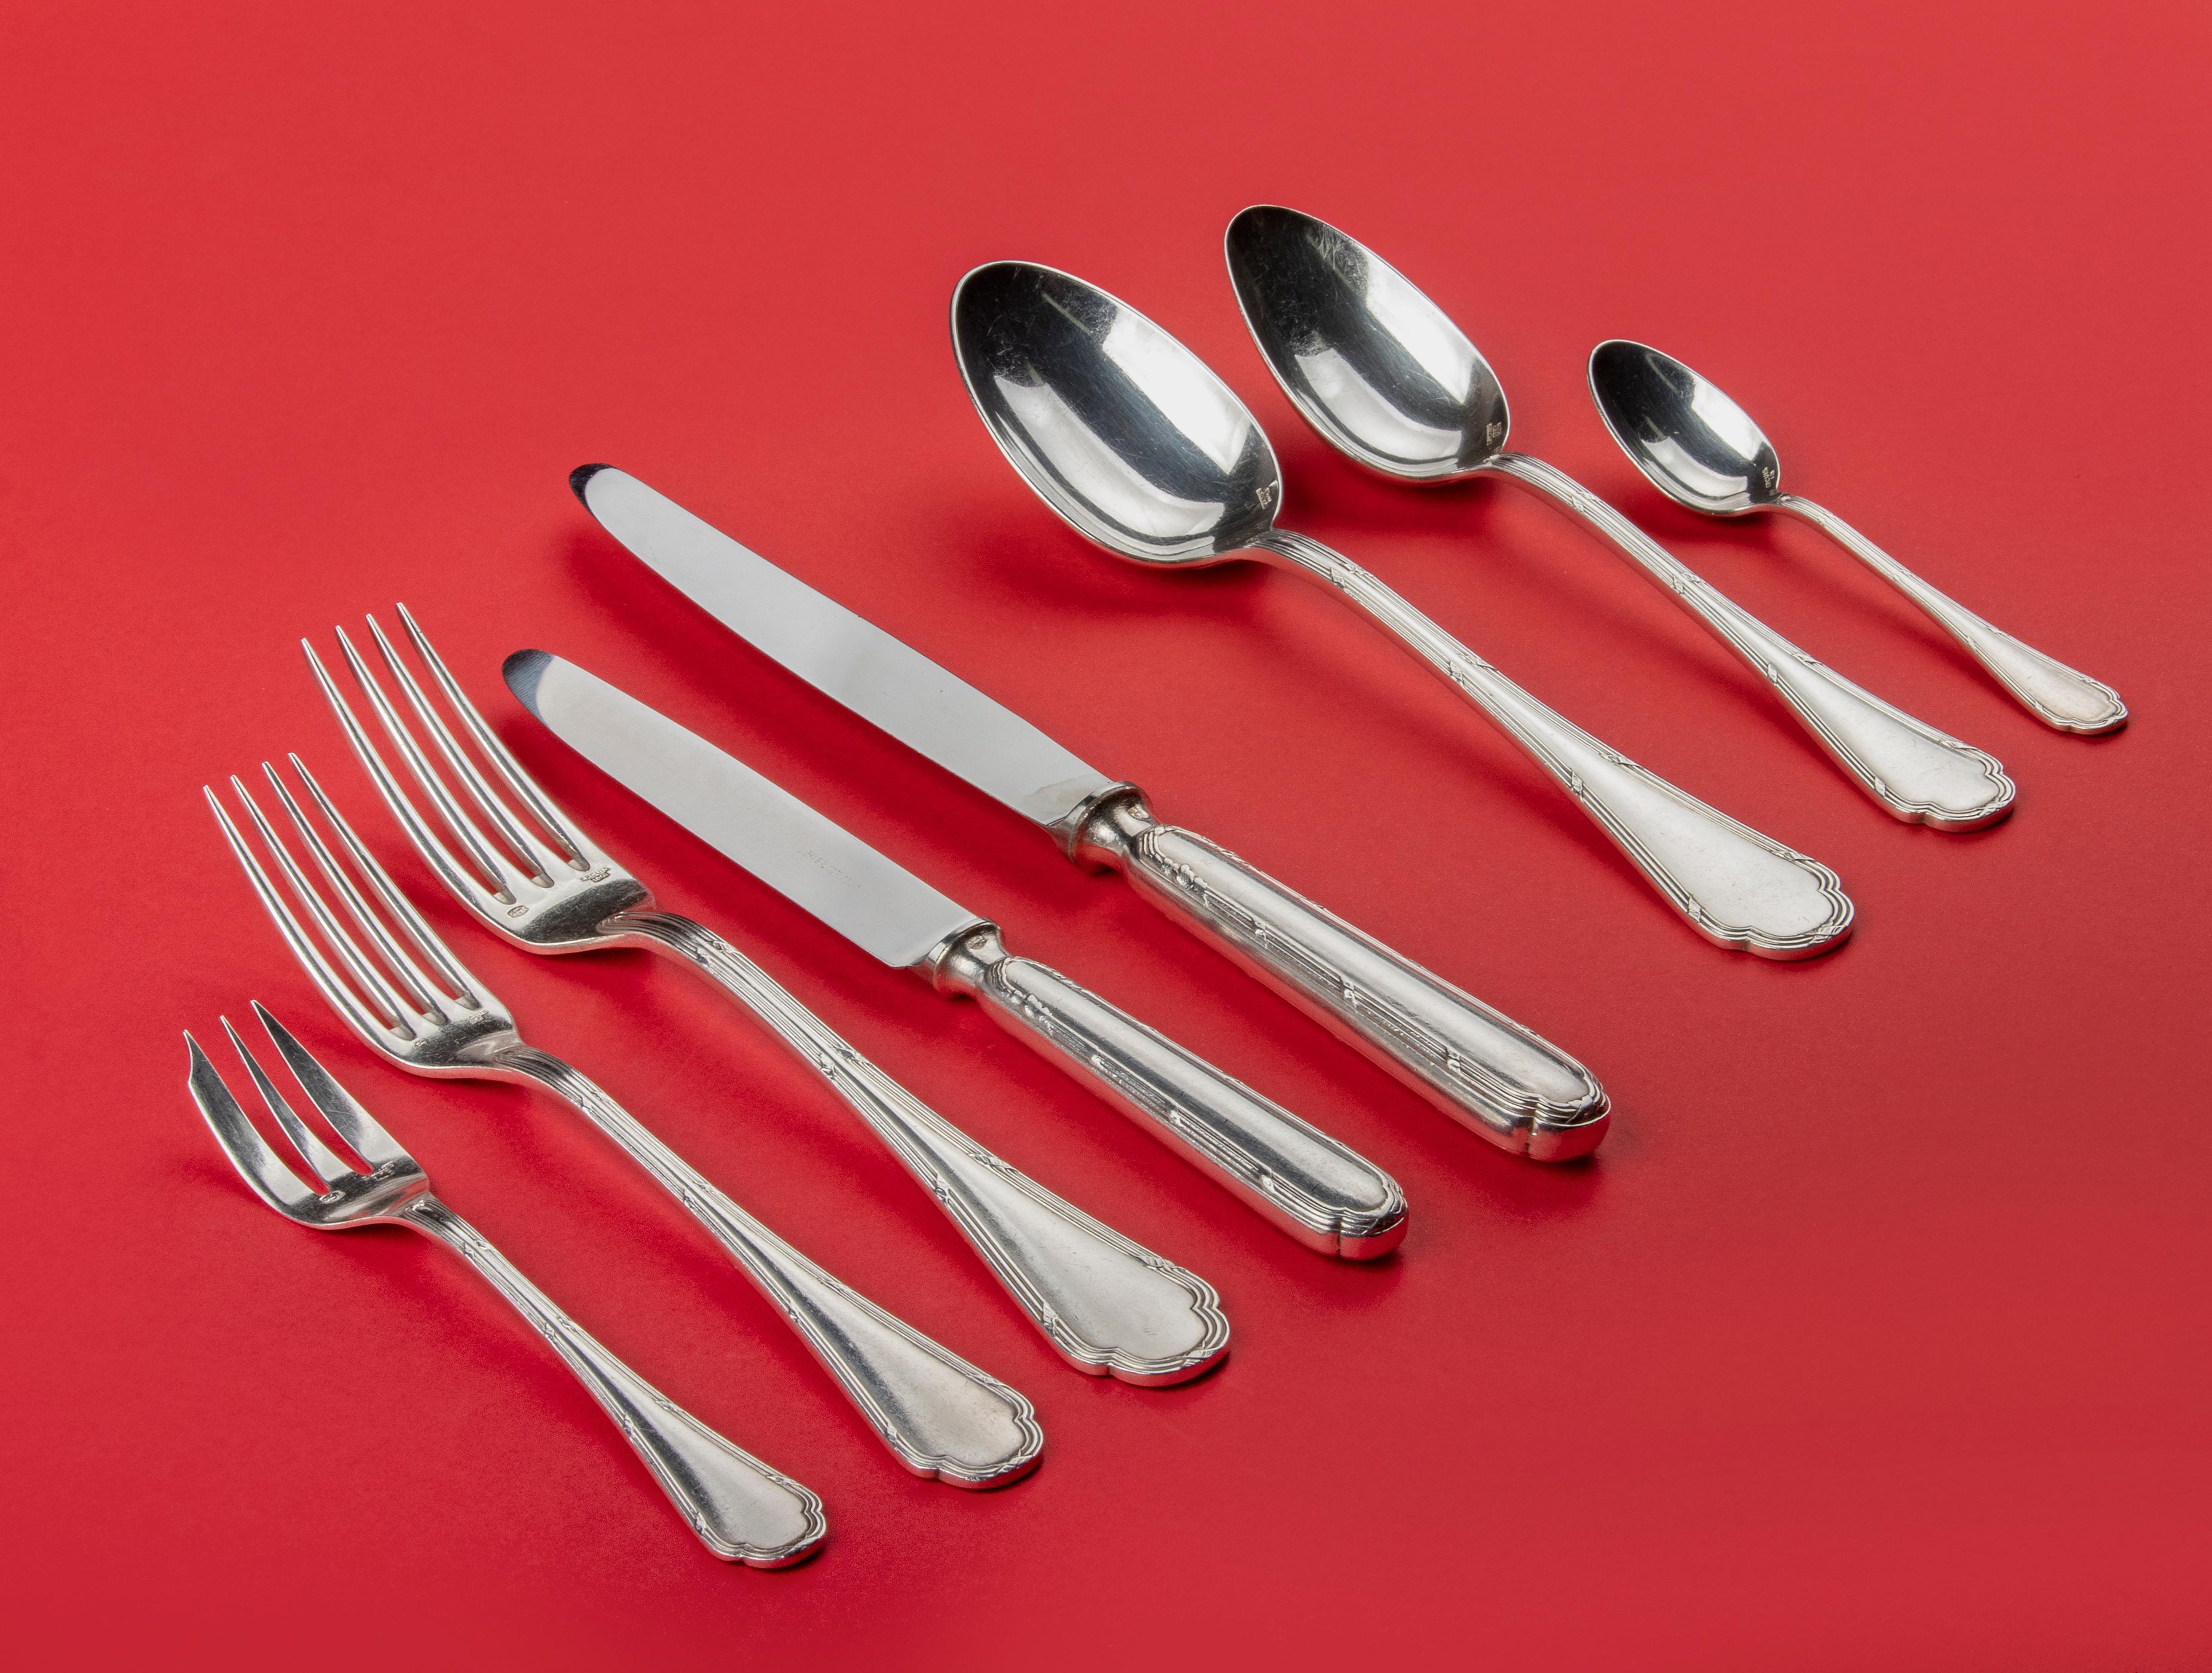 Beautiful silver plated flatware set for 12 people from the French brand Ercuis. The composition of the set is as follows: 12 large knives, 12 small knives, 12 large spoons, 12 small spoons, 12 large forks, 12 small forks, 12 teaspoons and 12 pastry